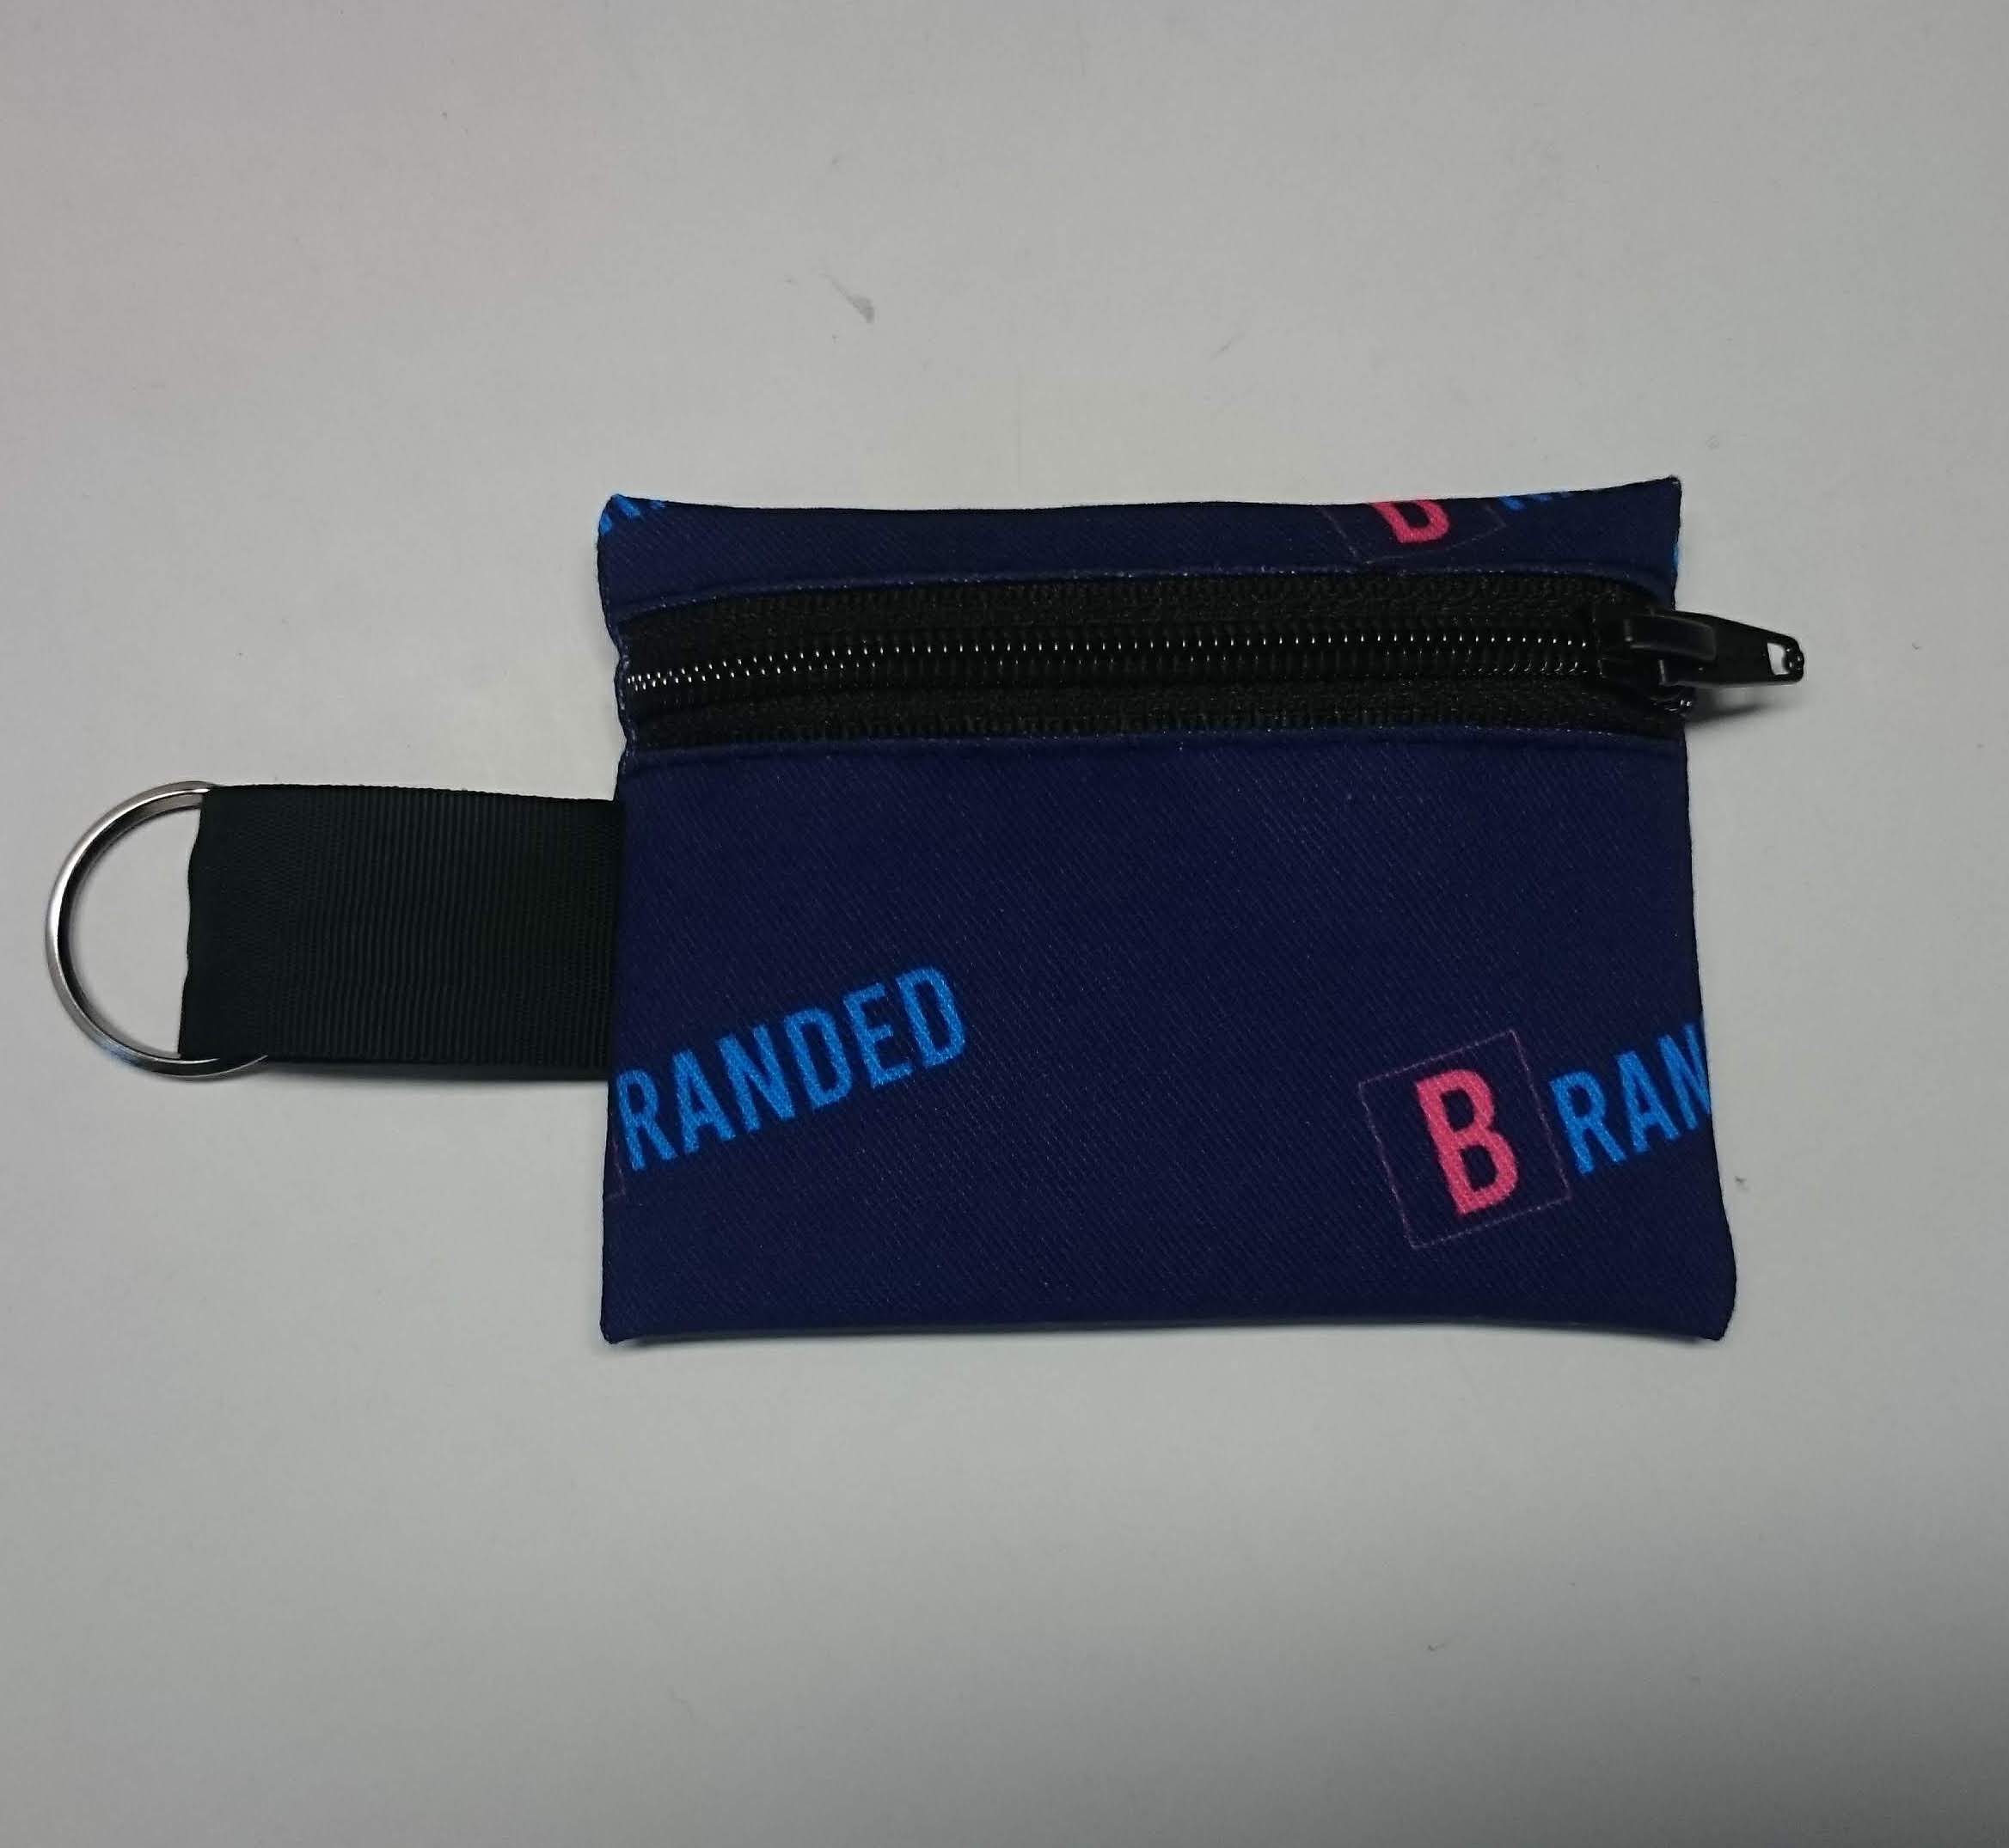 Sublimated zippered pouch key chain